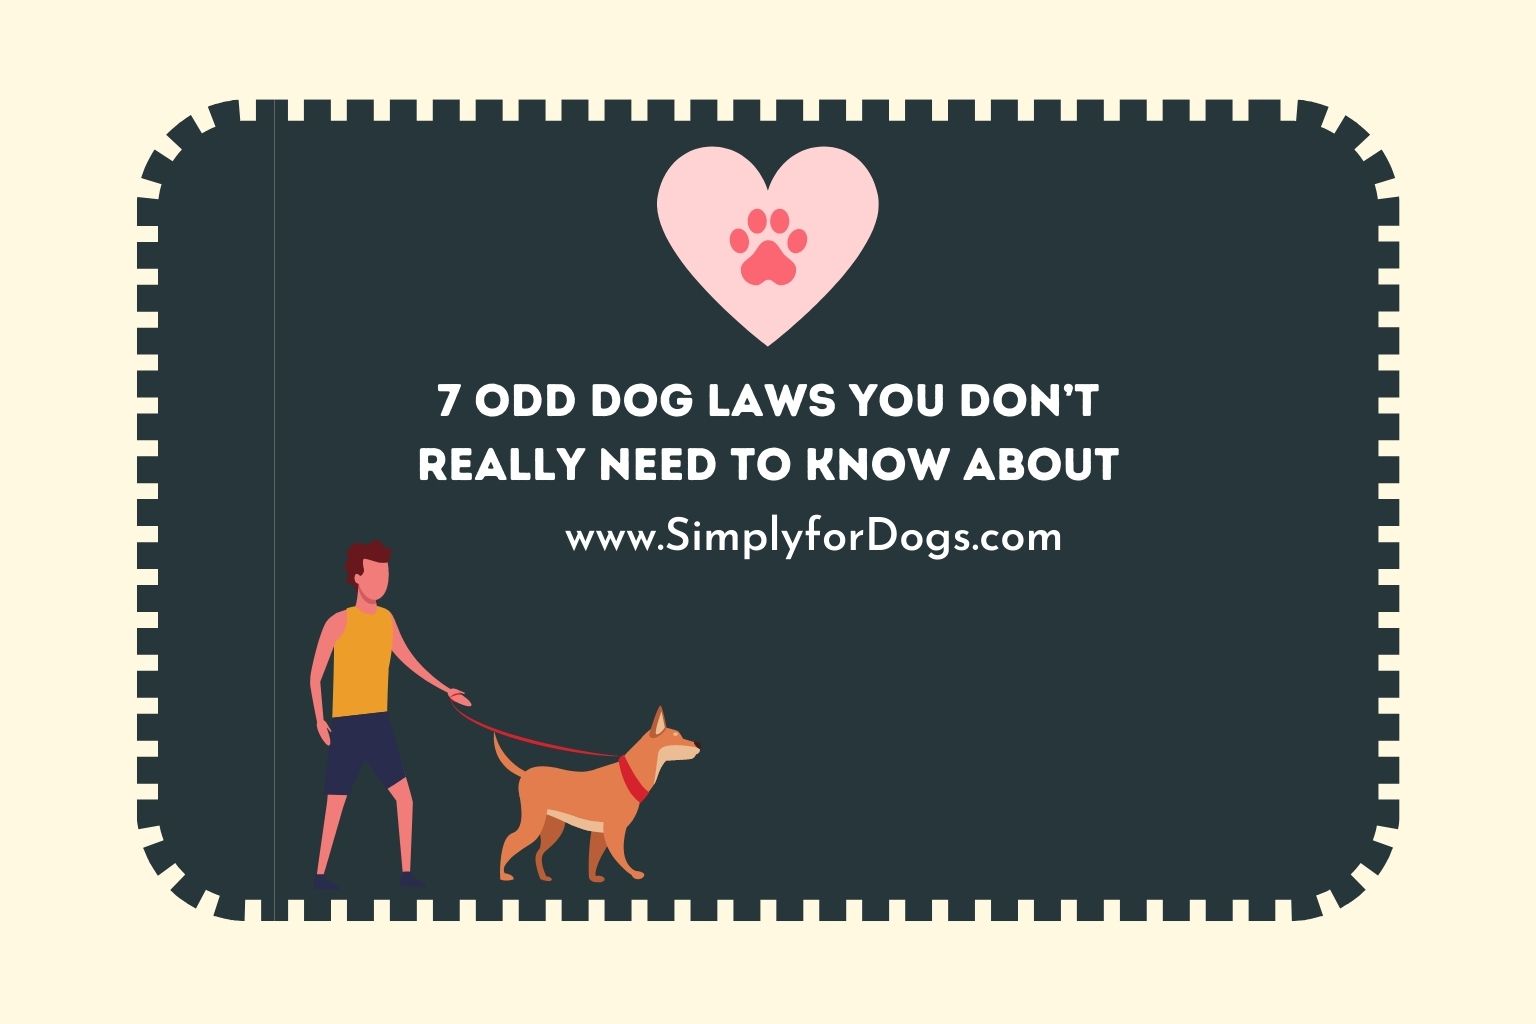 7 Odd Dog Laws You Don’t REALLY Need to Know About